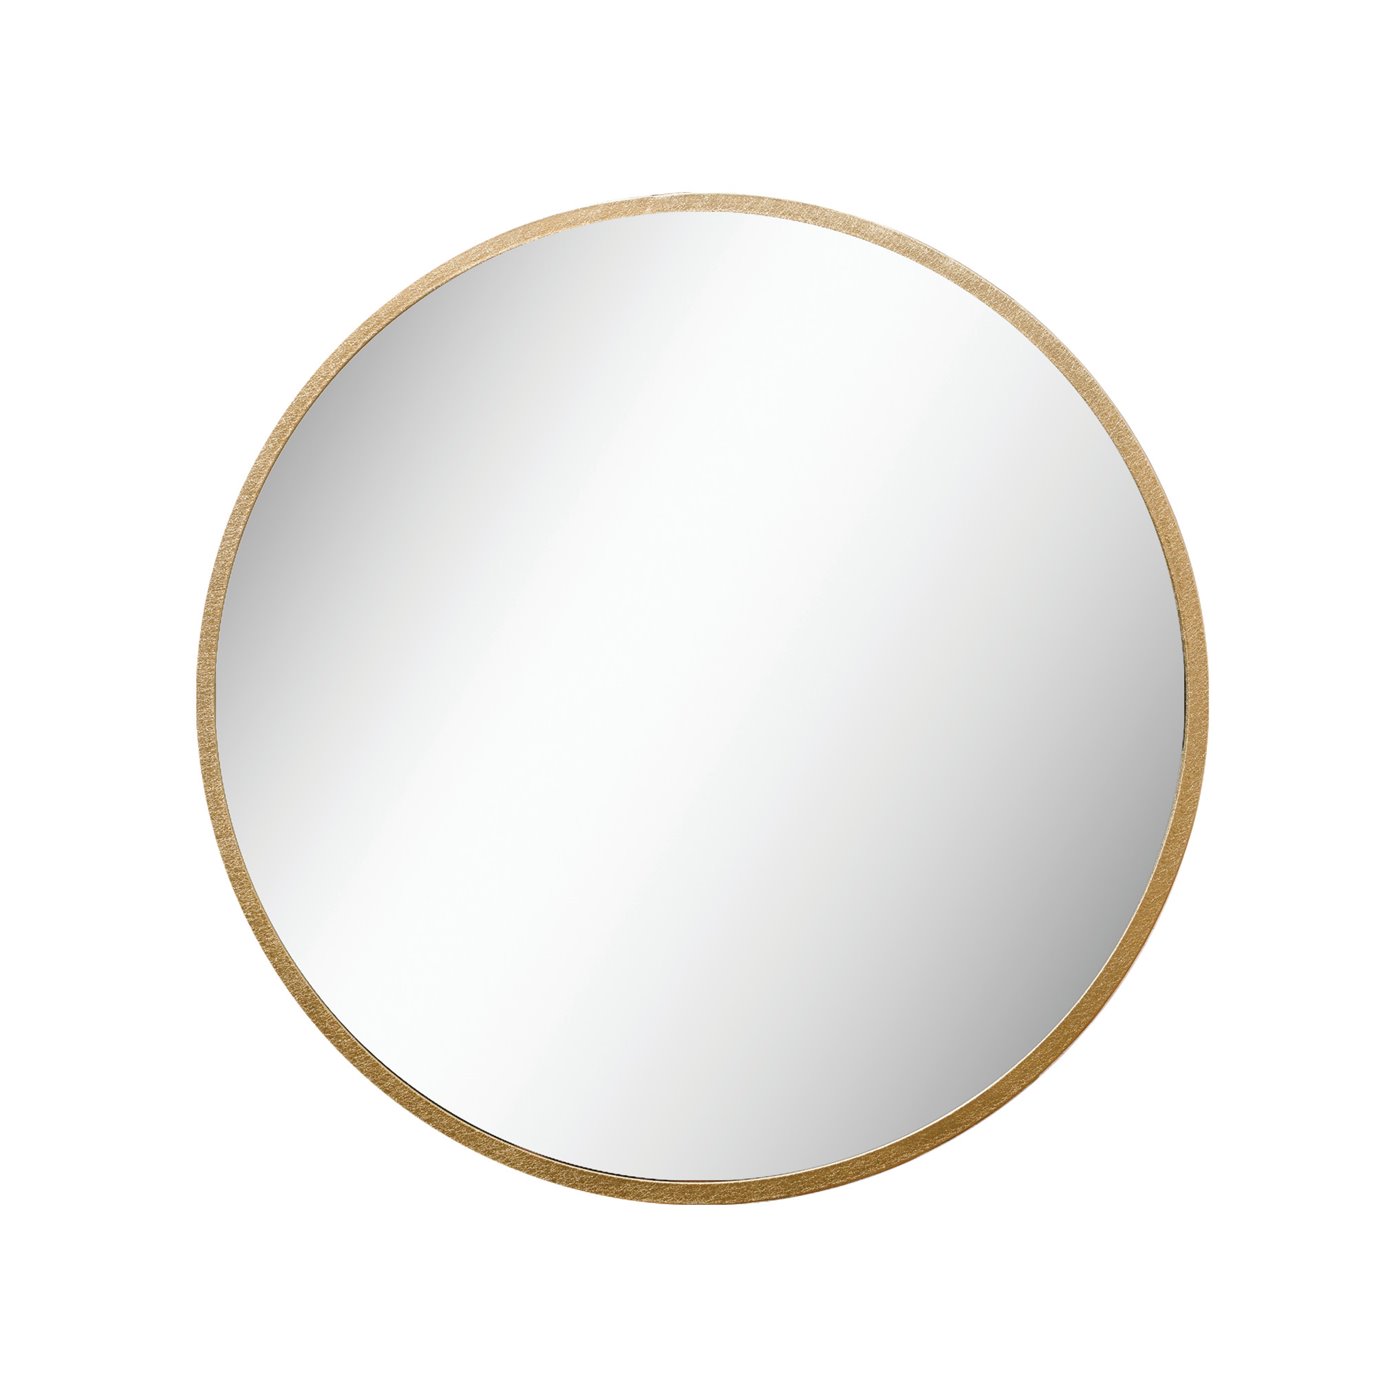 35.5 in. Round Metal Framed Wall Mirror